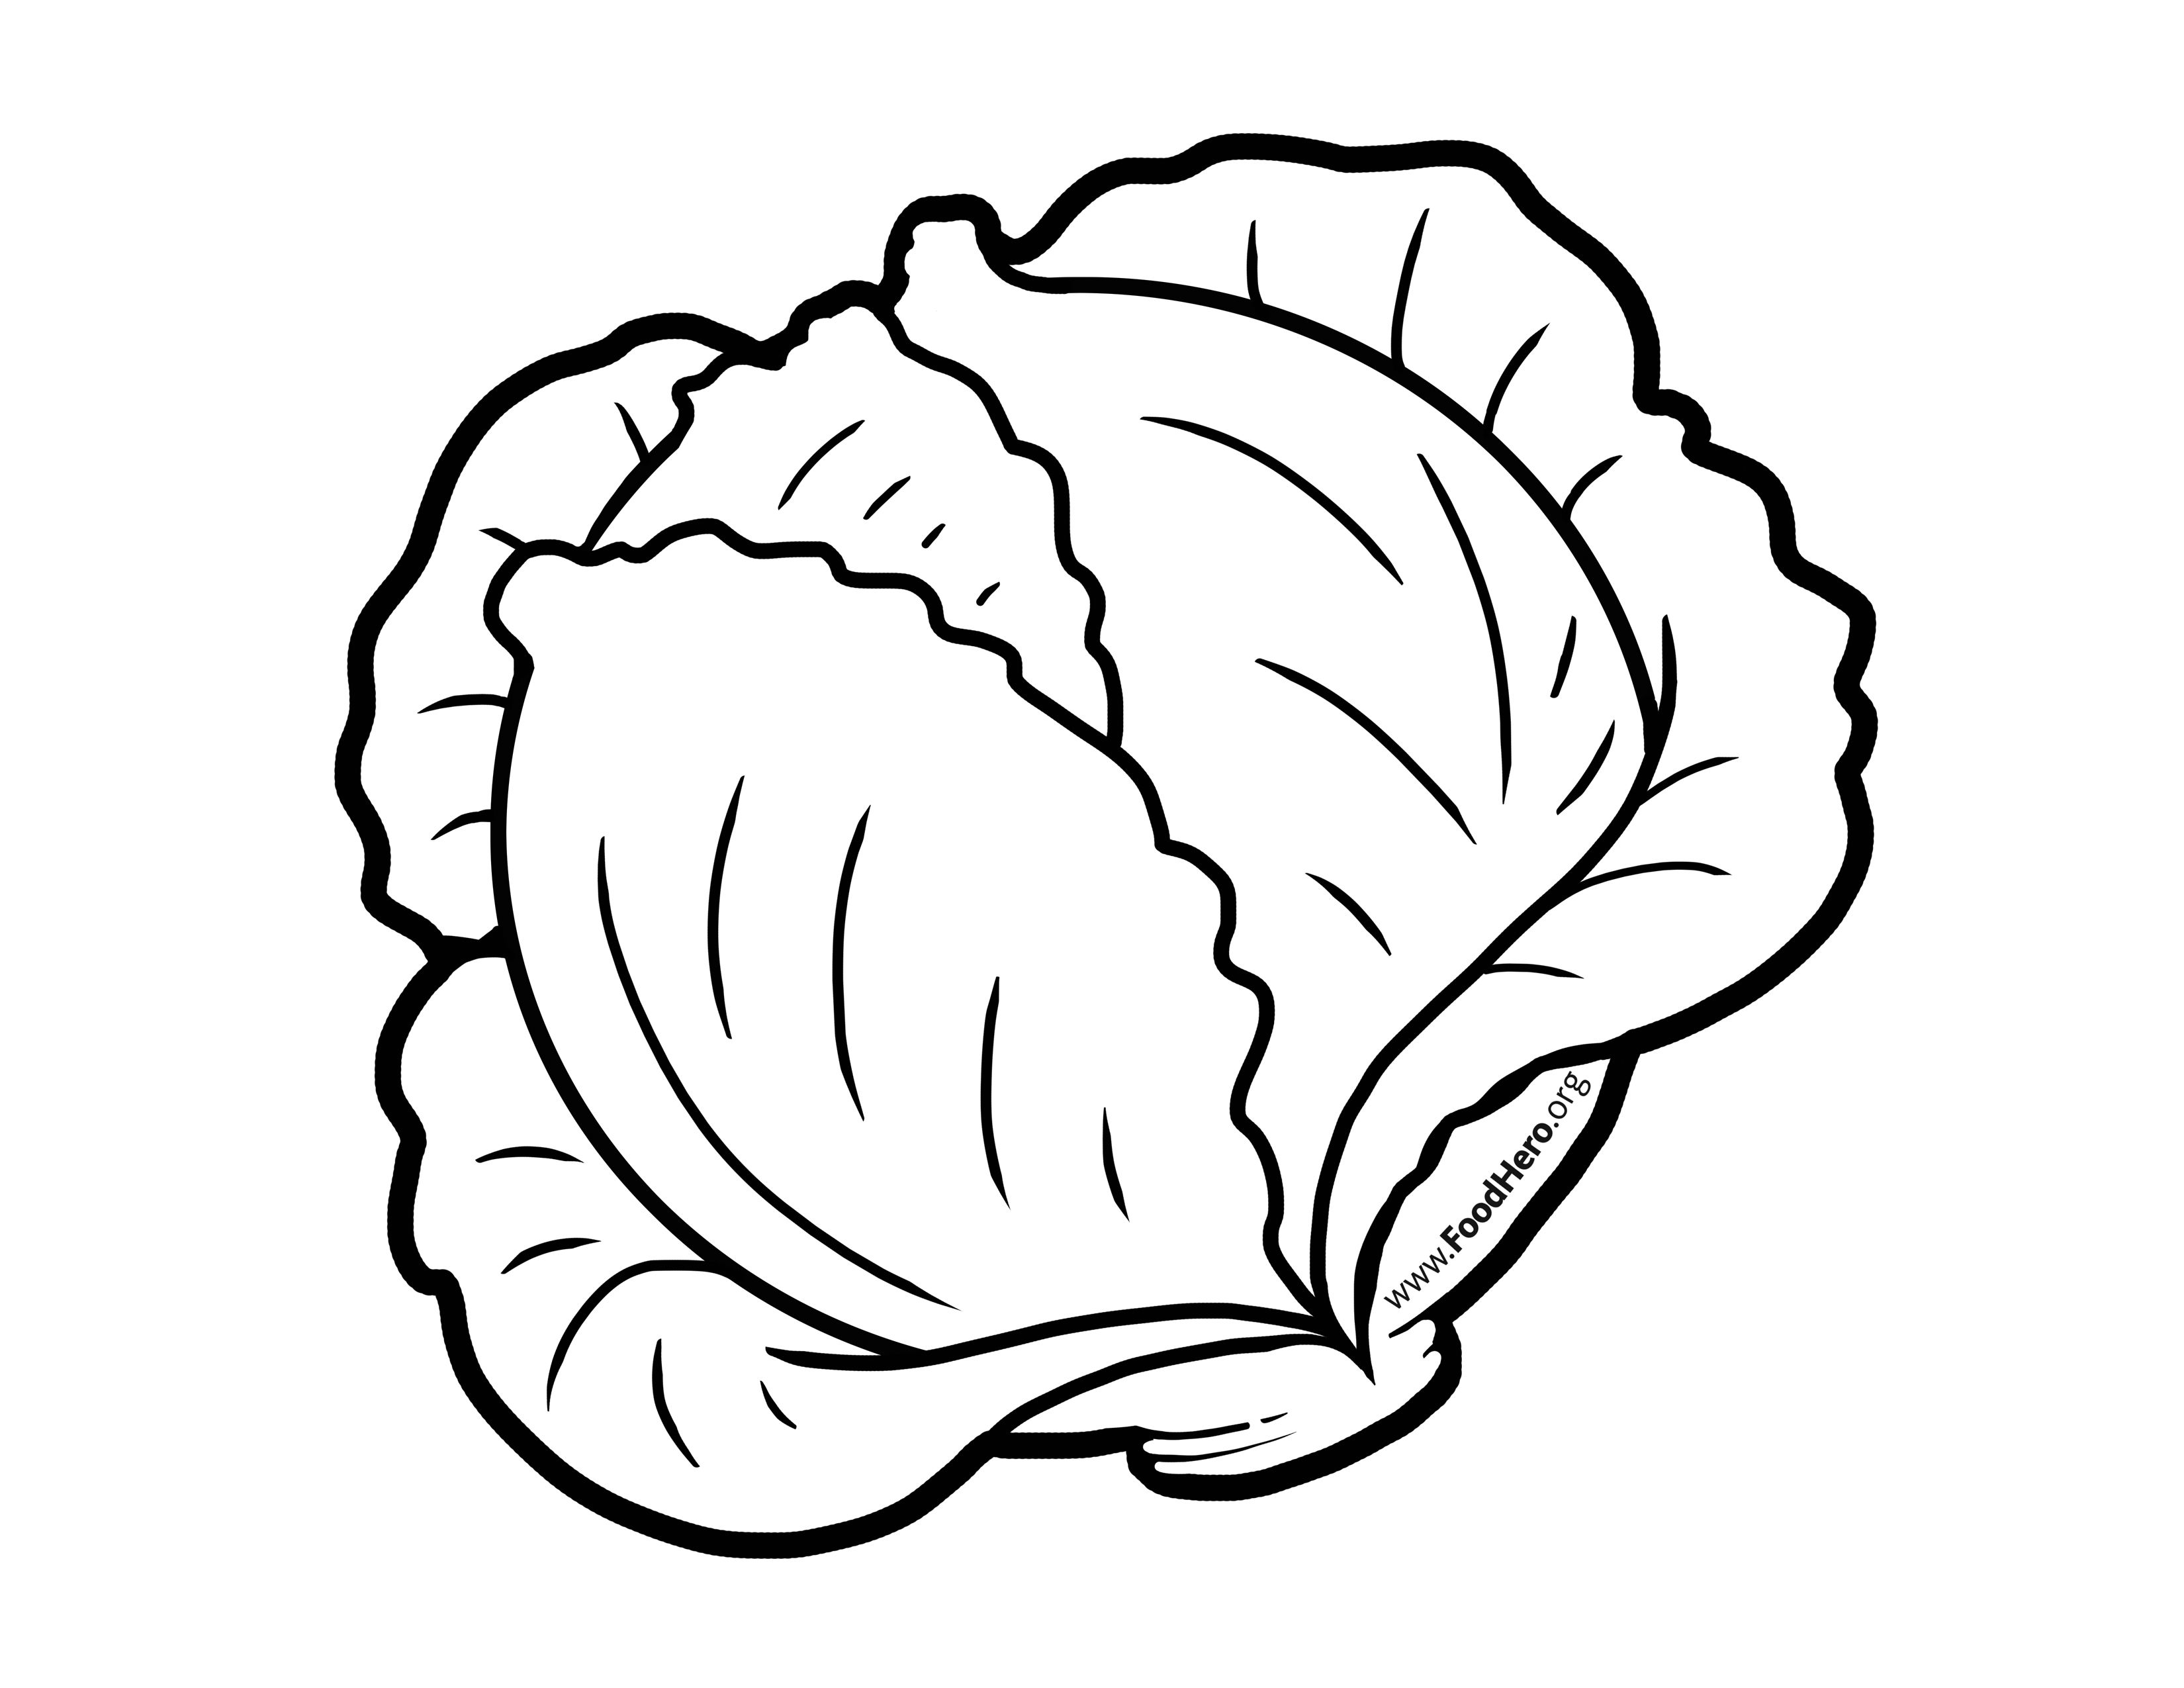 Great How To Draw Cabbage of the decade Check it out now 